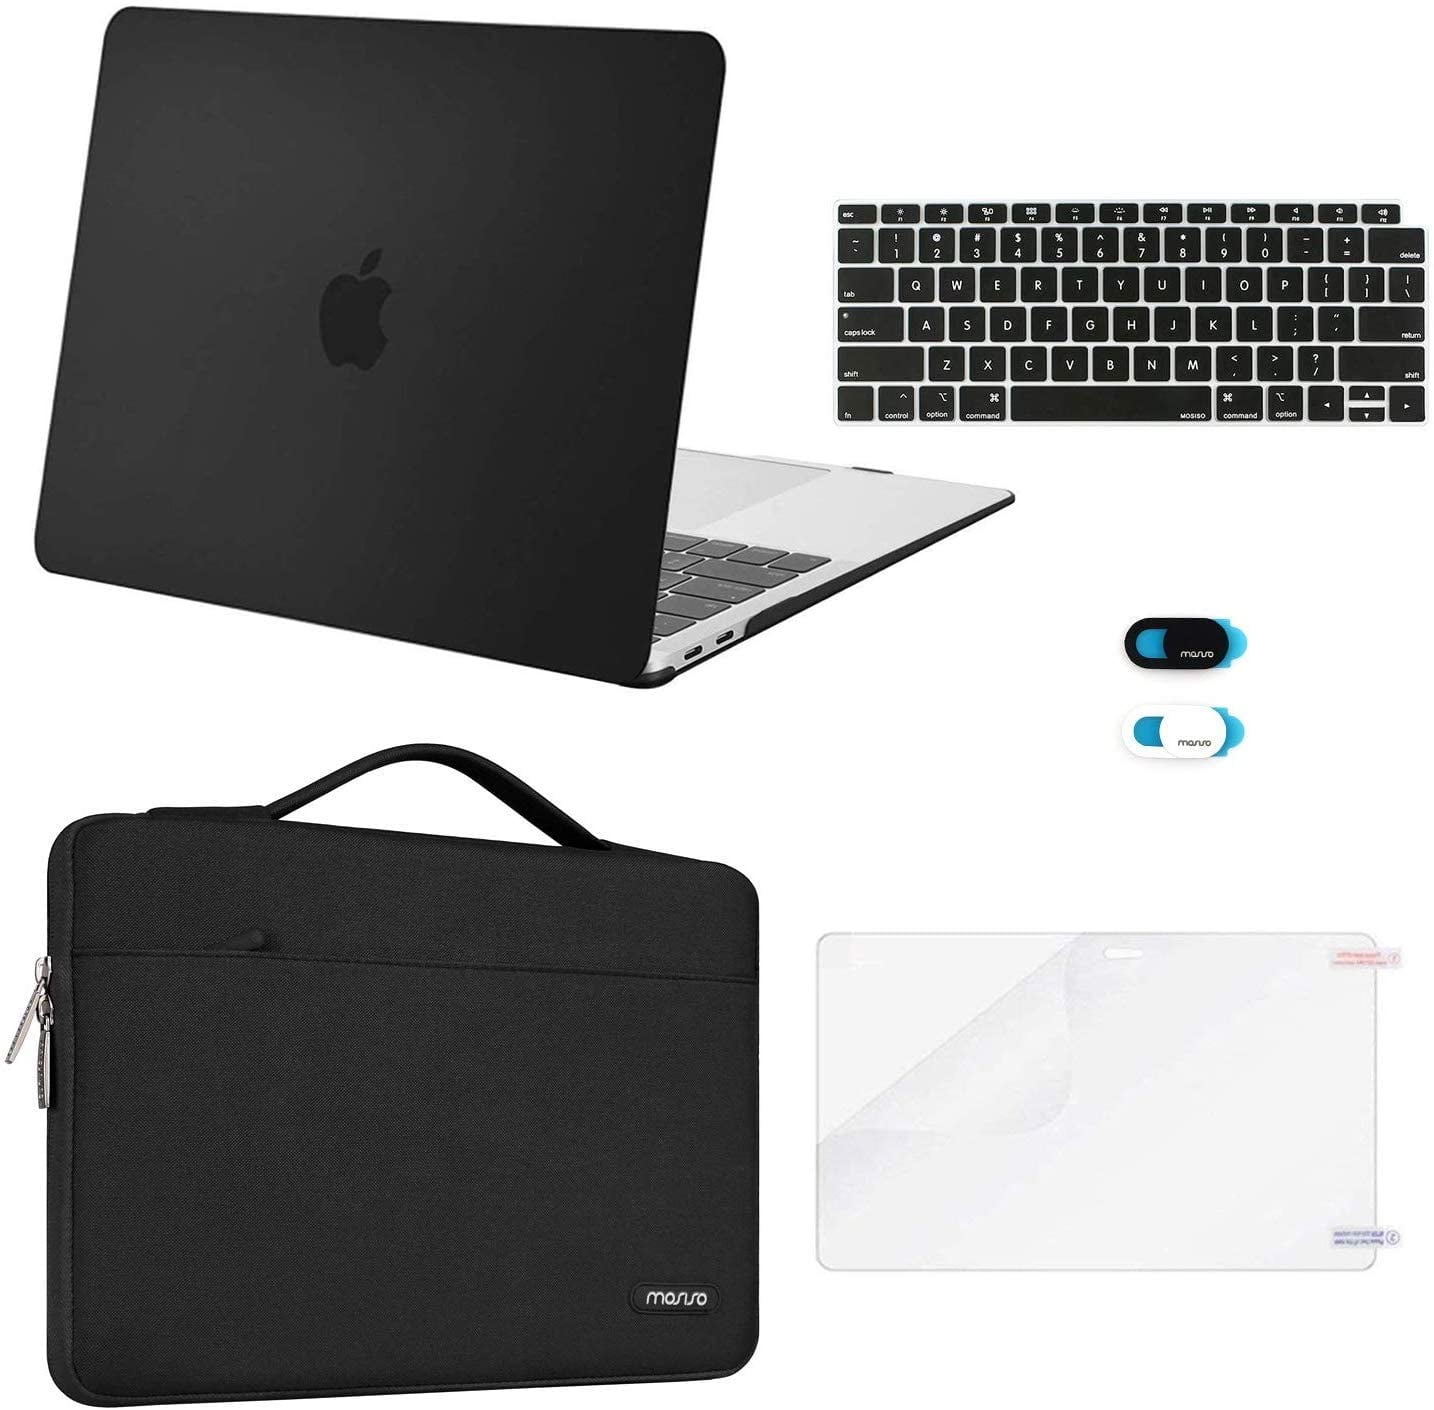 Mosiso 5 in 1 New Macbook Air 13 Inch Case A2337 M1 A2179 2020 Release, Hard Case Shell Cover&Sleeve Bag for Apple MacBook Air 13'' with Retina Display andTouch ID, Black